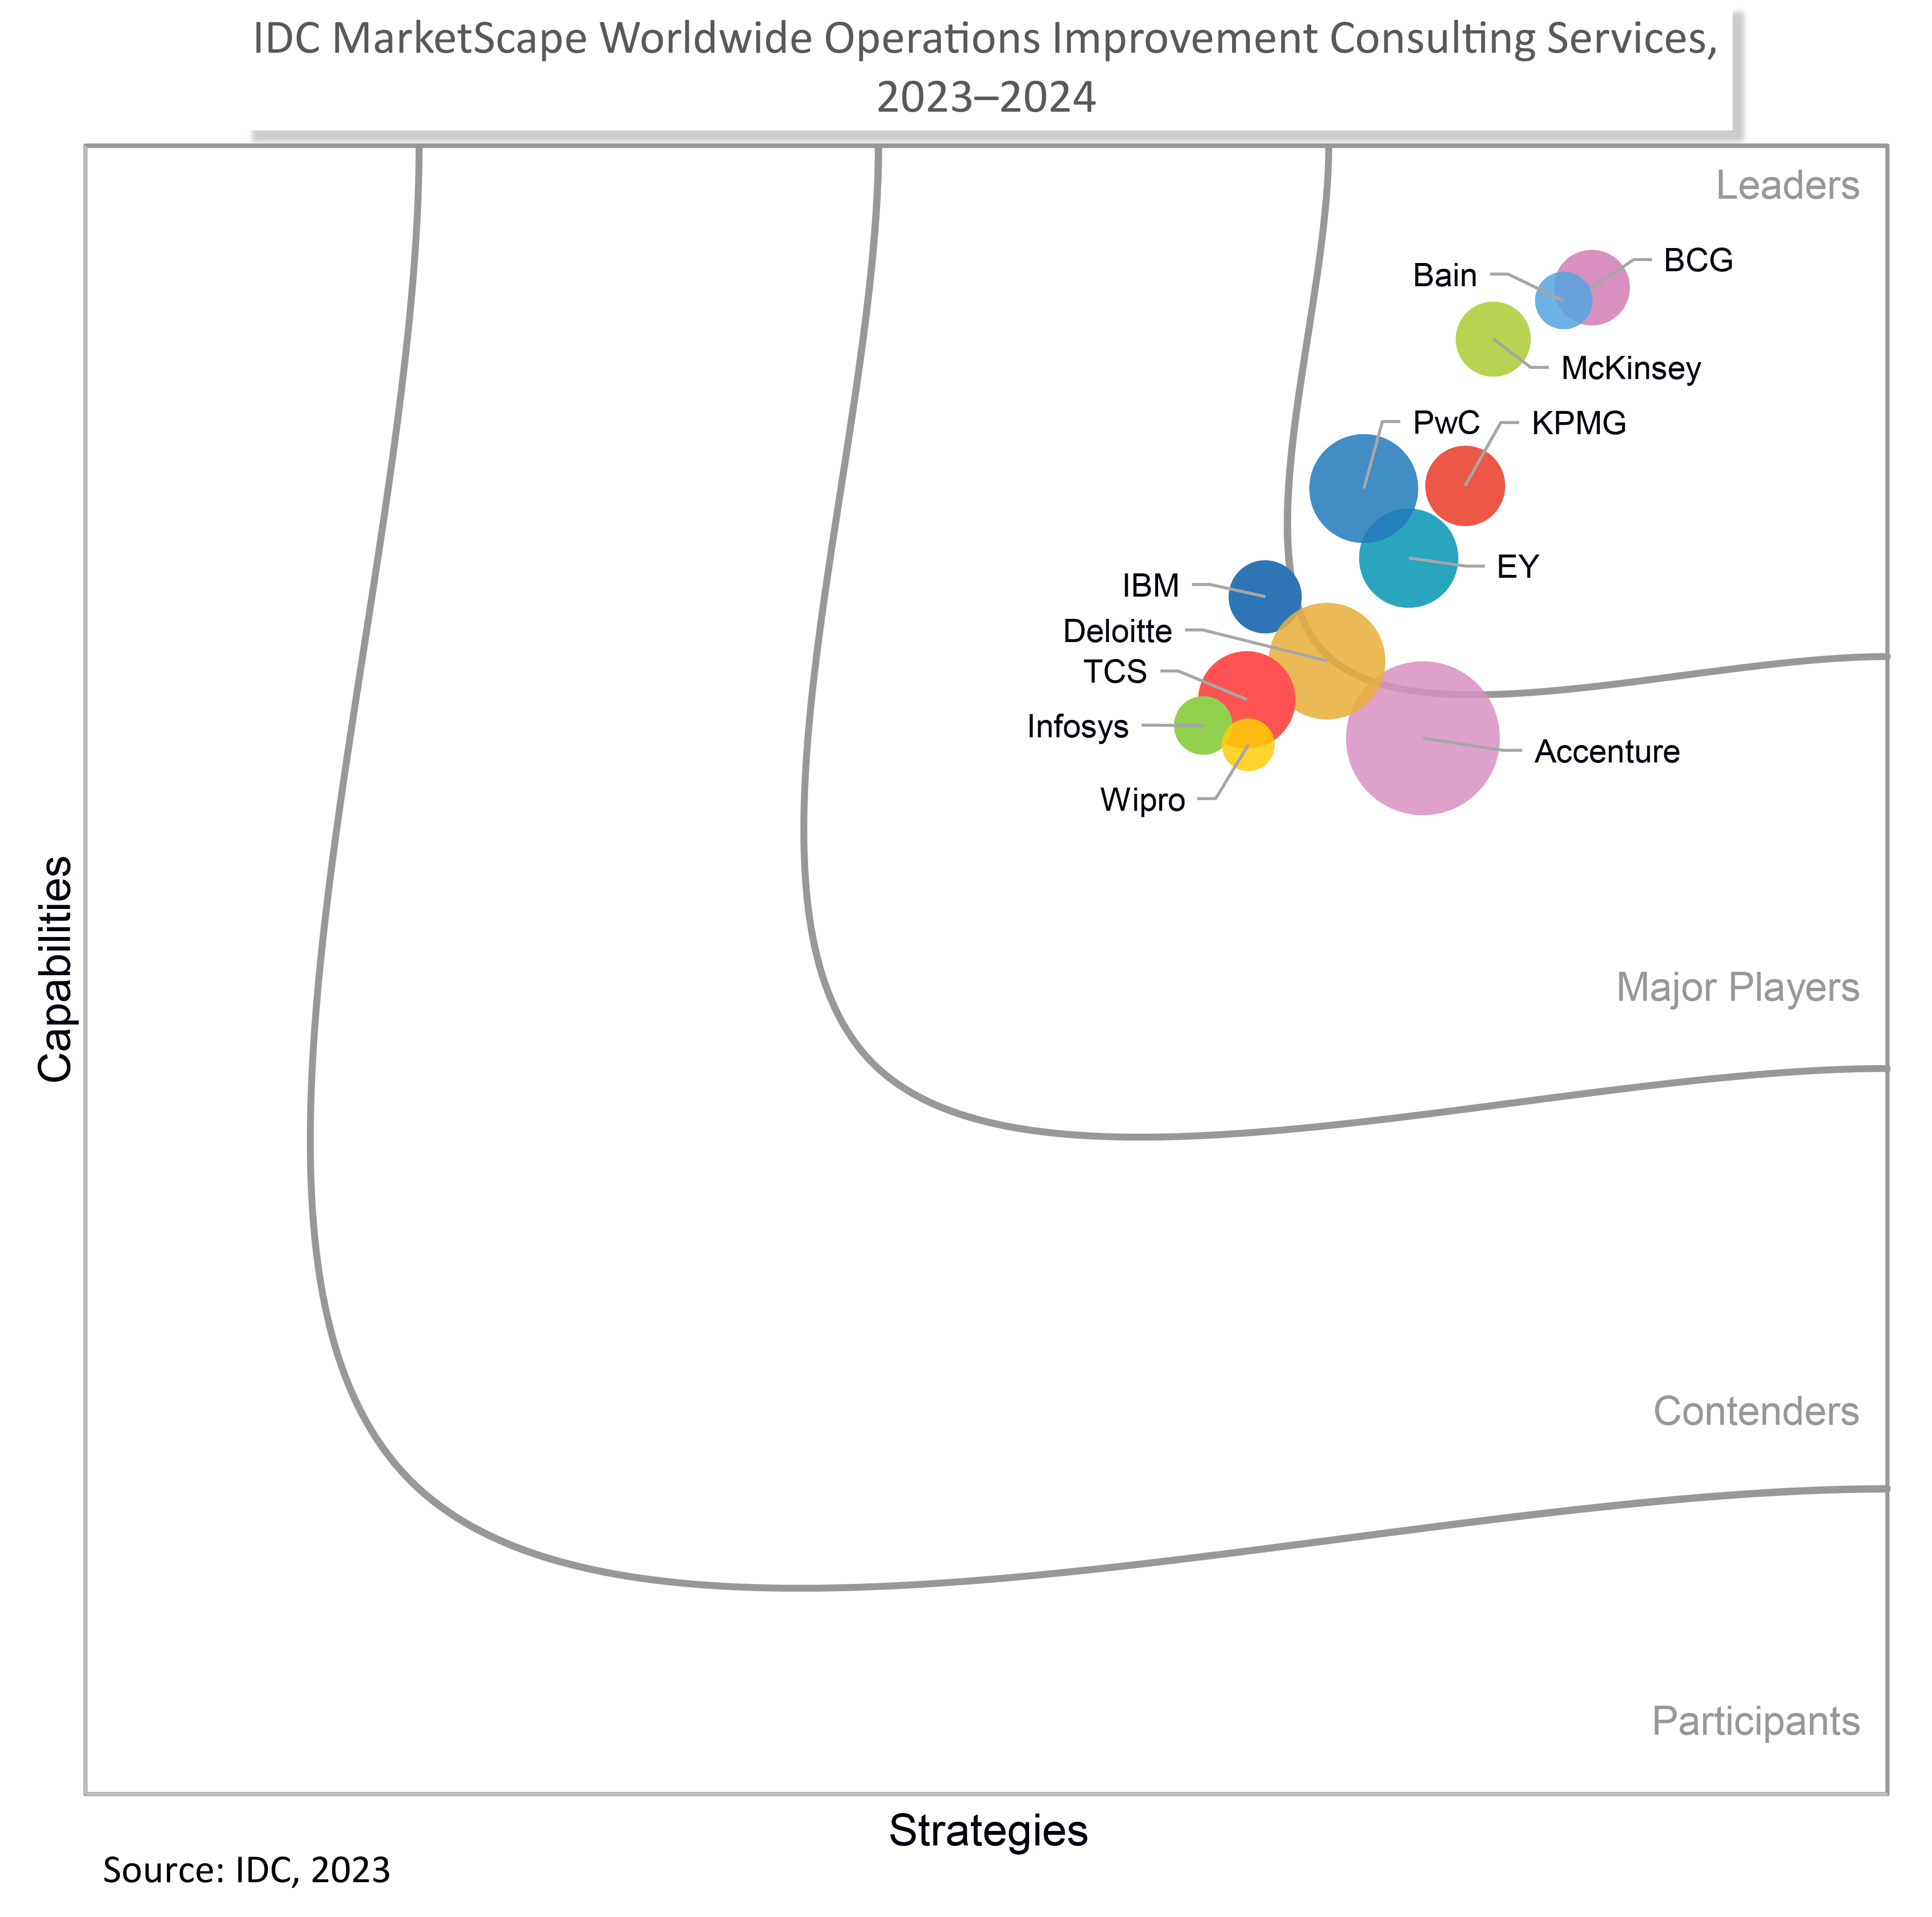 IDC Marketscape: Worldwide Operations Improvement Consulting Services 2023-2024